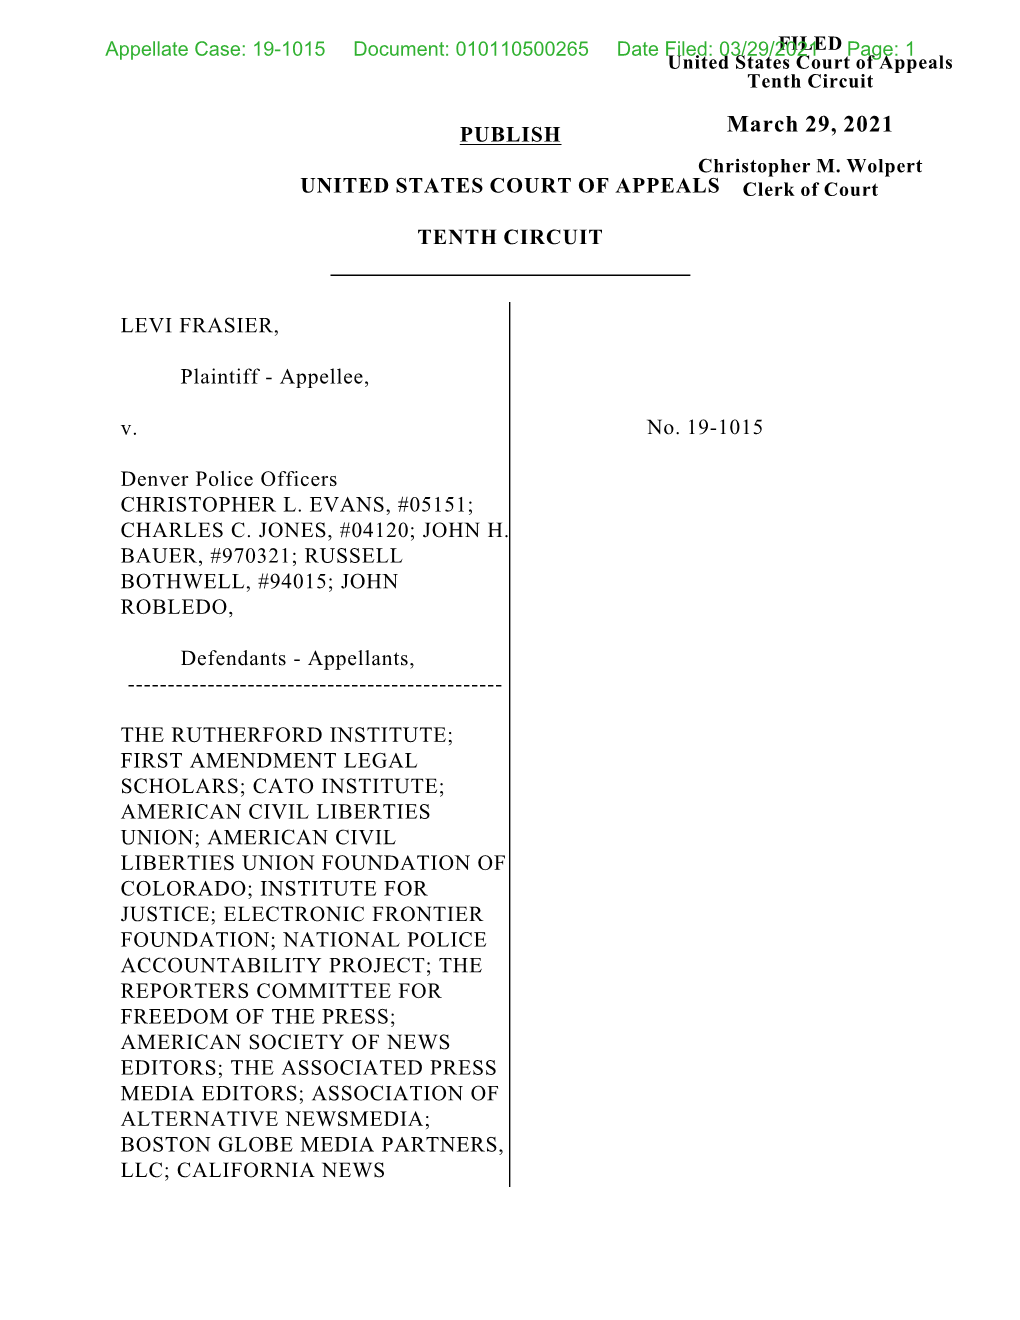 FILED United States Court of Appeals Tenth Circuit